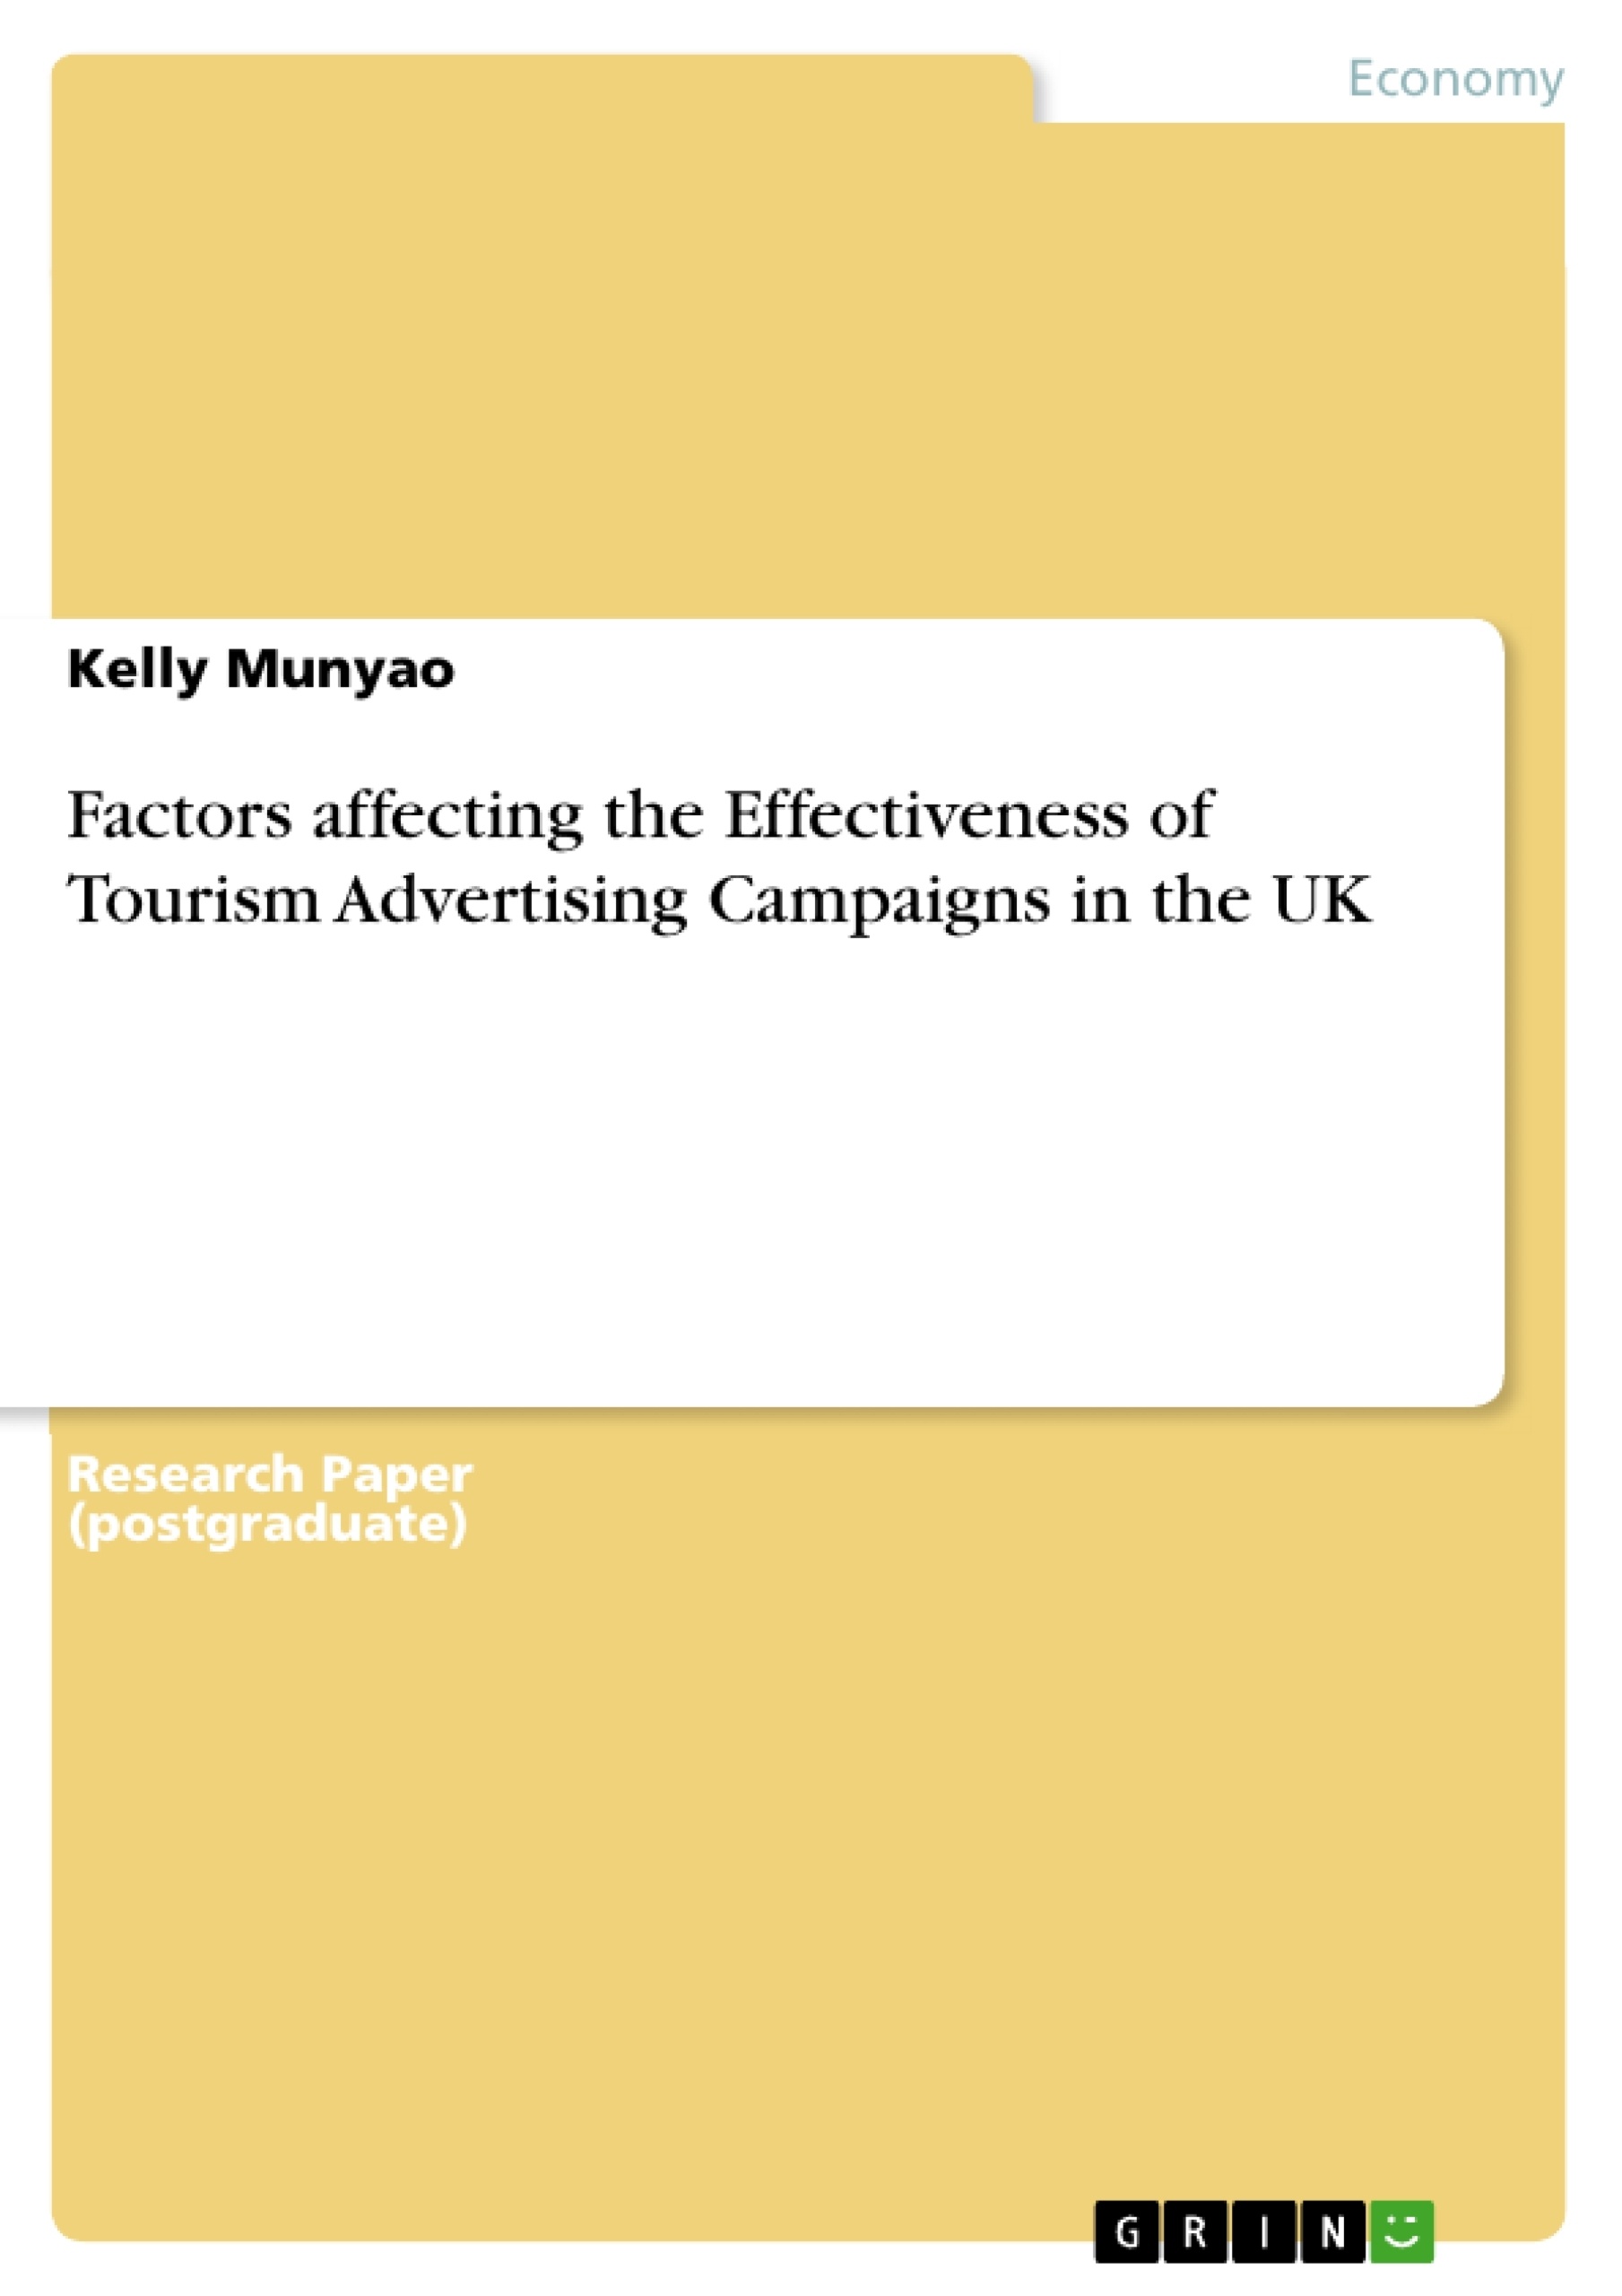 Titre: Factors affecting the Effectiveness of Tourism Advertising Campaigns in the UK